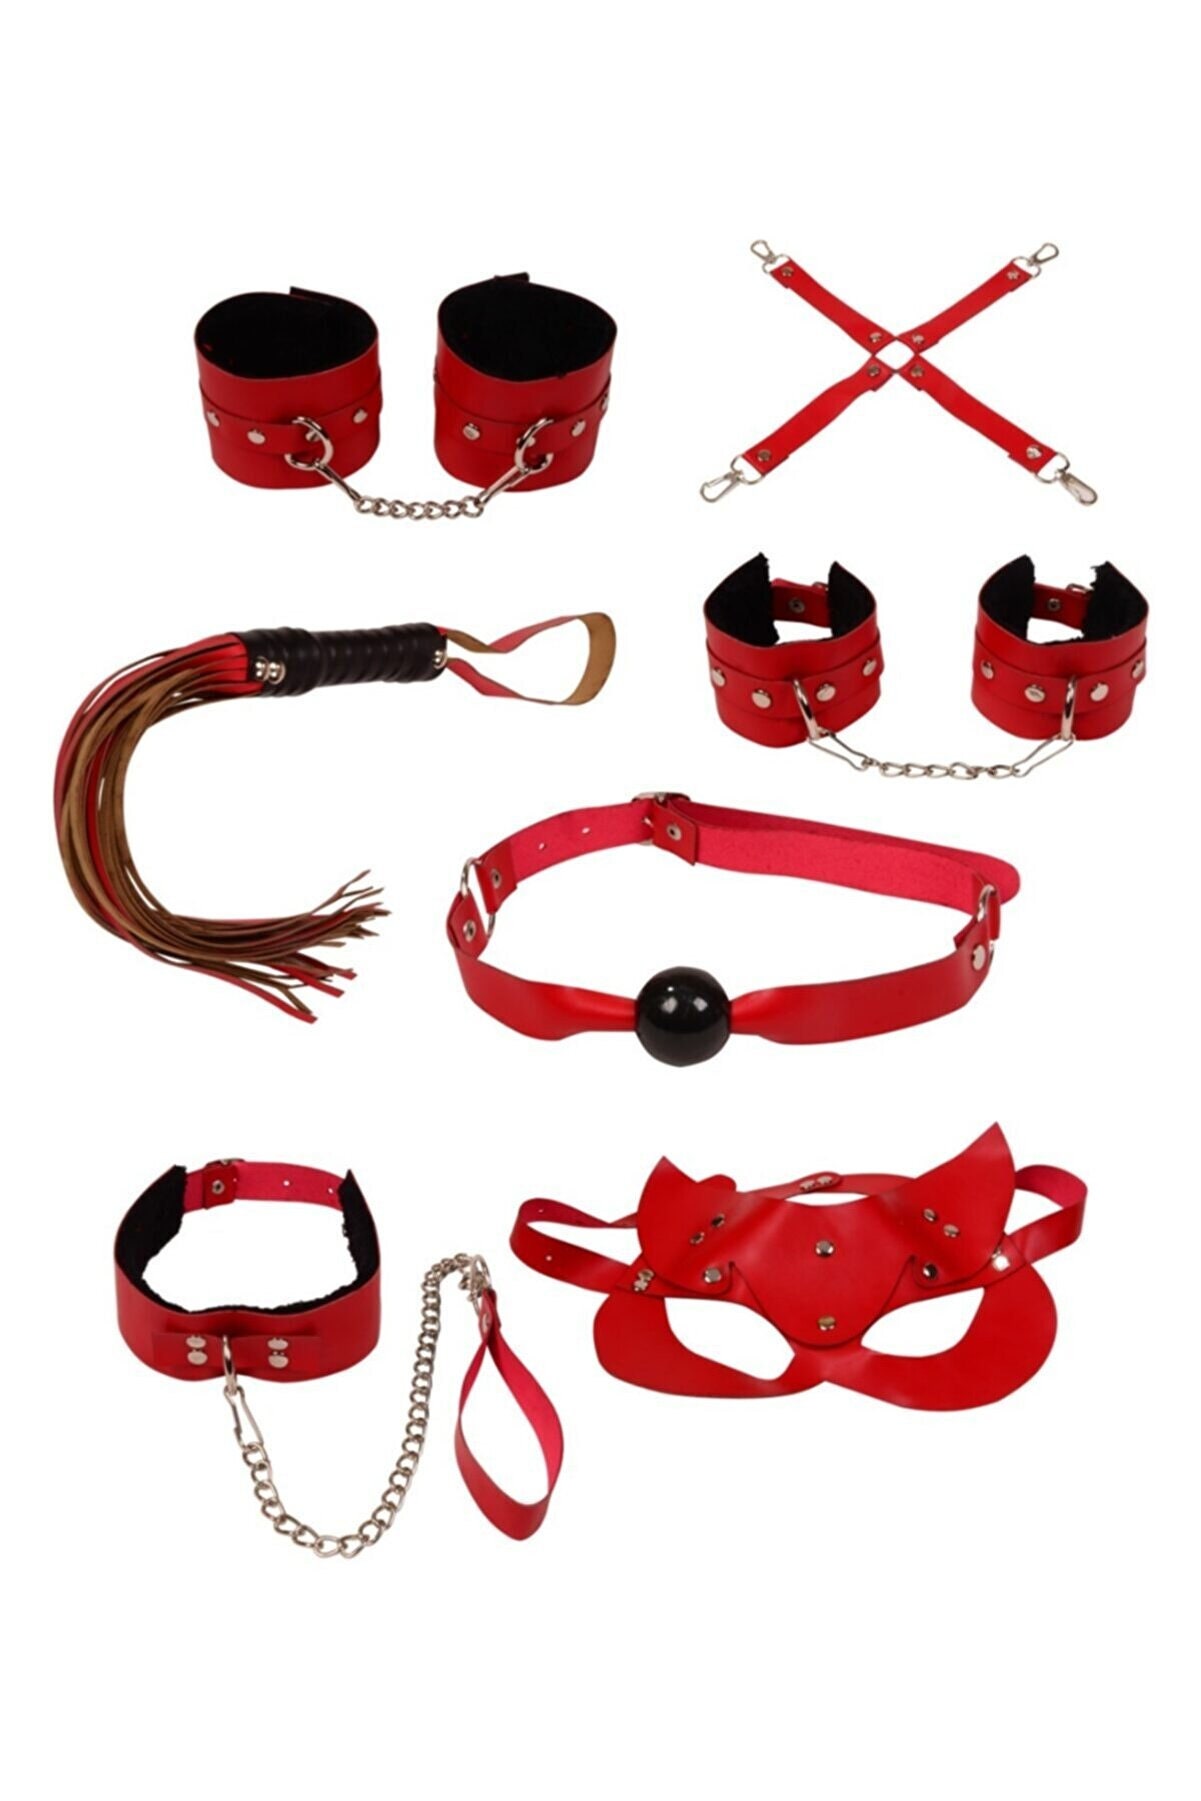 Adult Play Bondage Set : Nipple Clamps Clips, Soft Cotton Bondage Rope, Whip,  and Blindfold in Black Velvet Bag by Sexyzest 